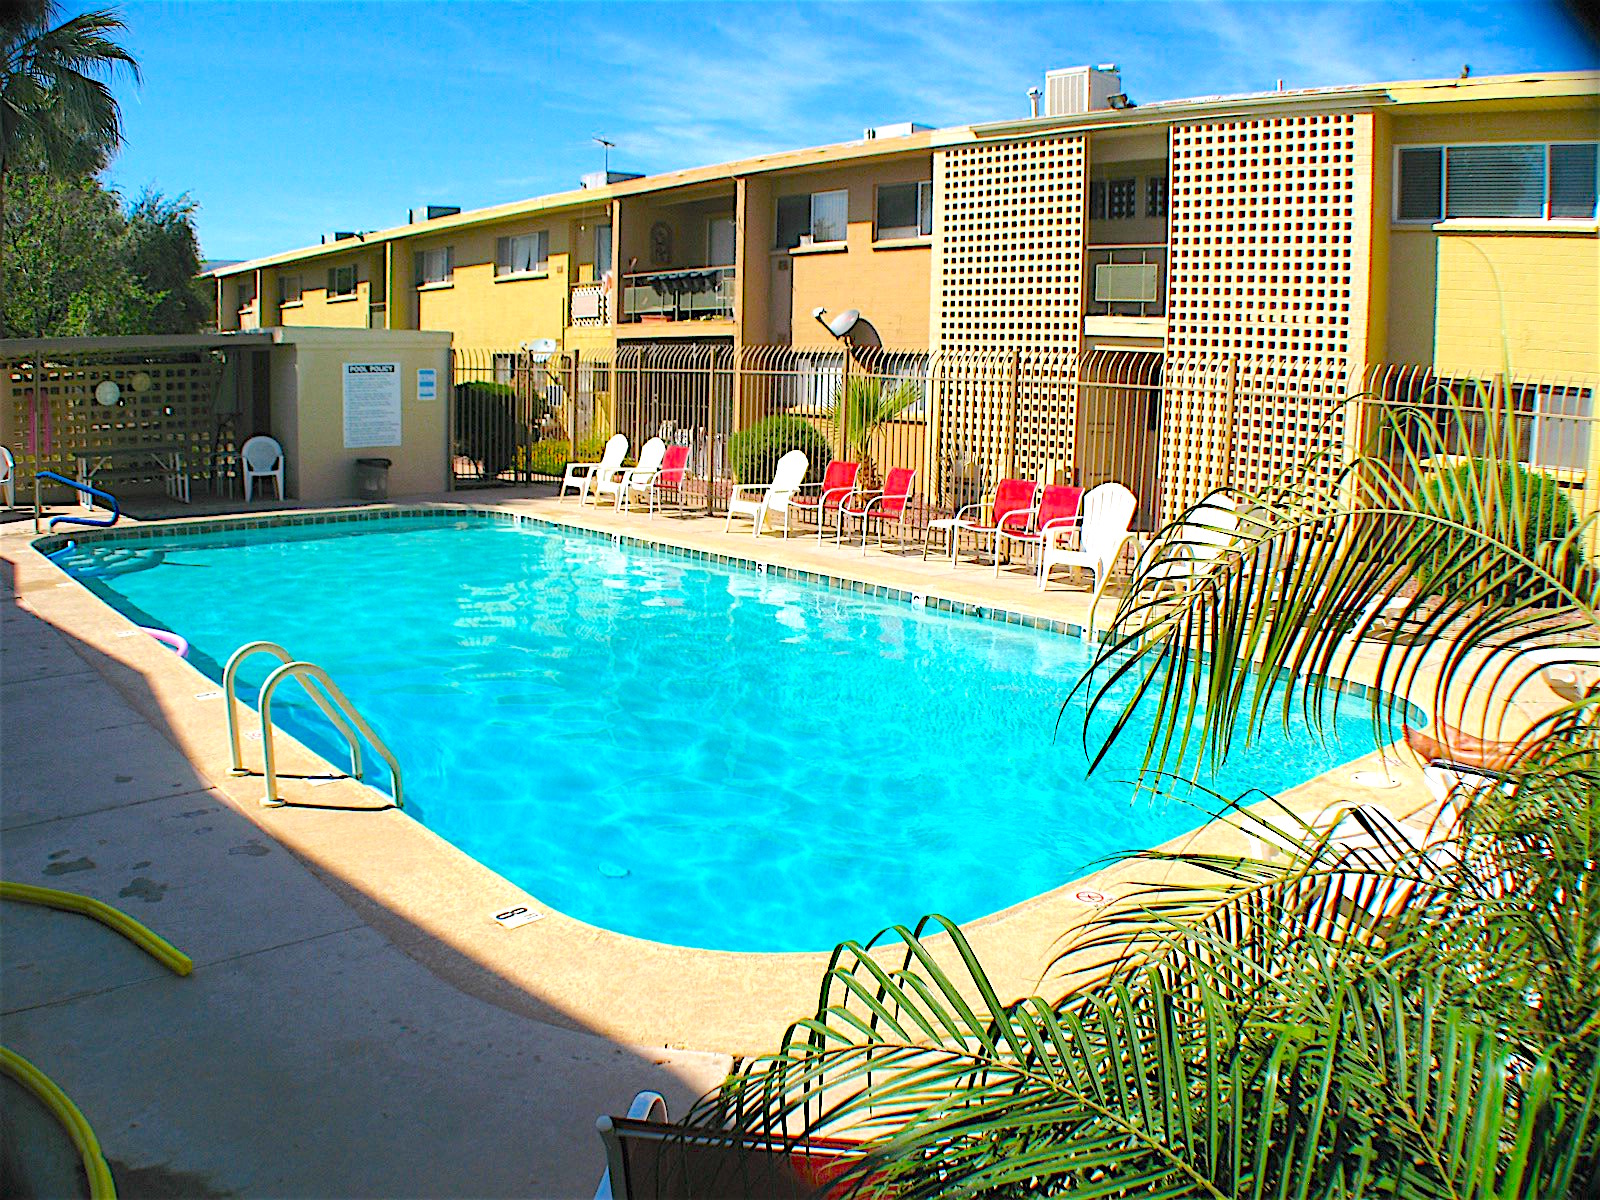 SOLD – Wow…Scottsdale Co-op living for under 60k…2 bed / 1 bath townhouse